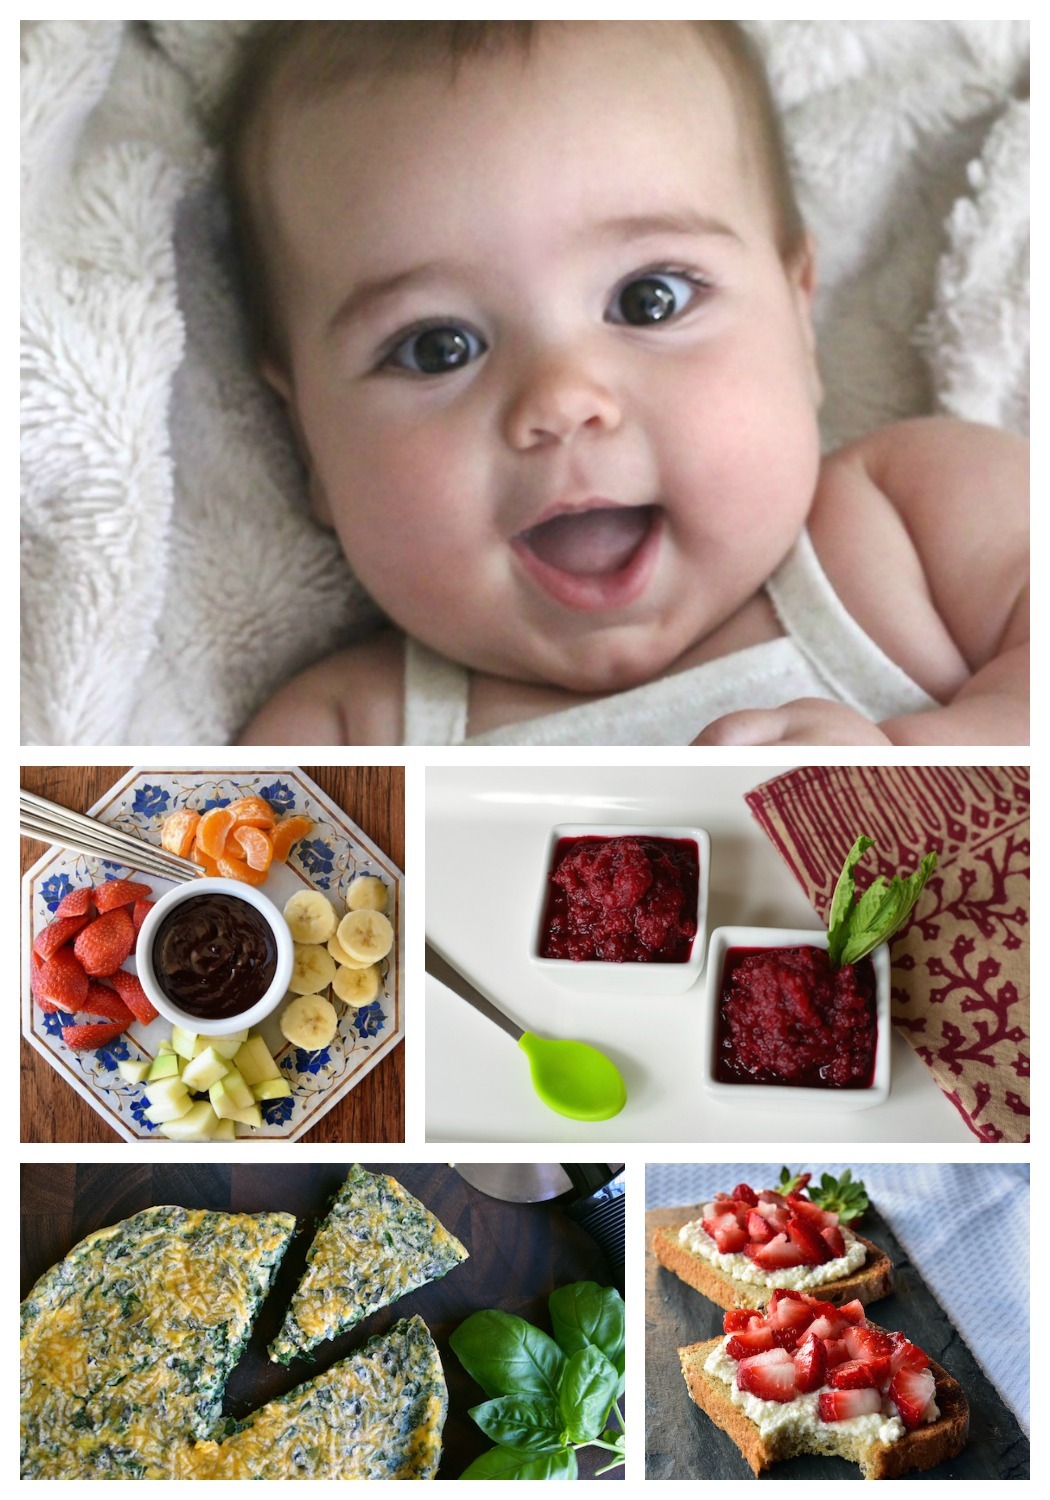 A Parent's Guide to Creating Good Eaters! | The Organic Kitchen Blog ...